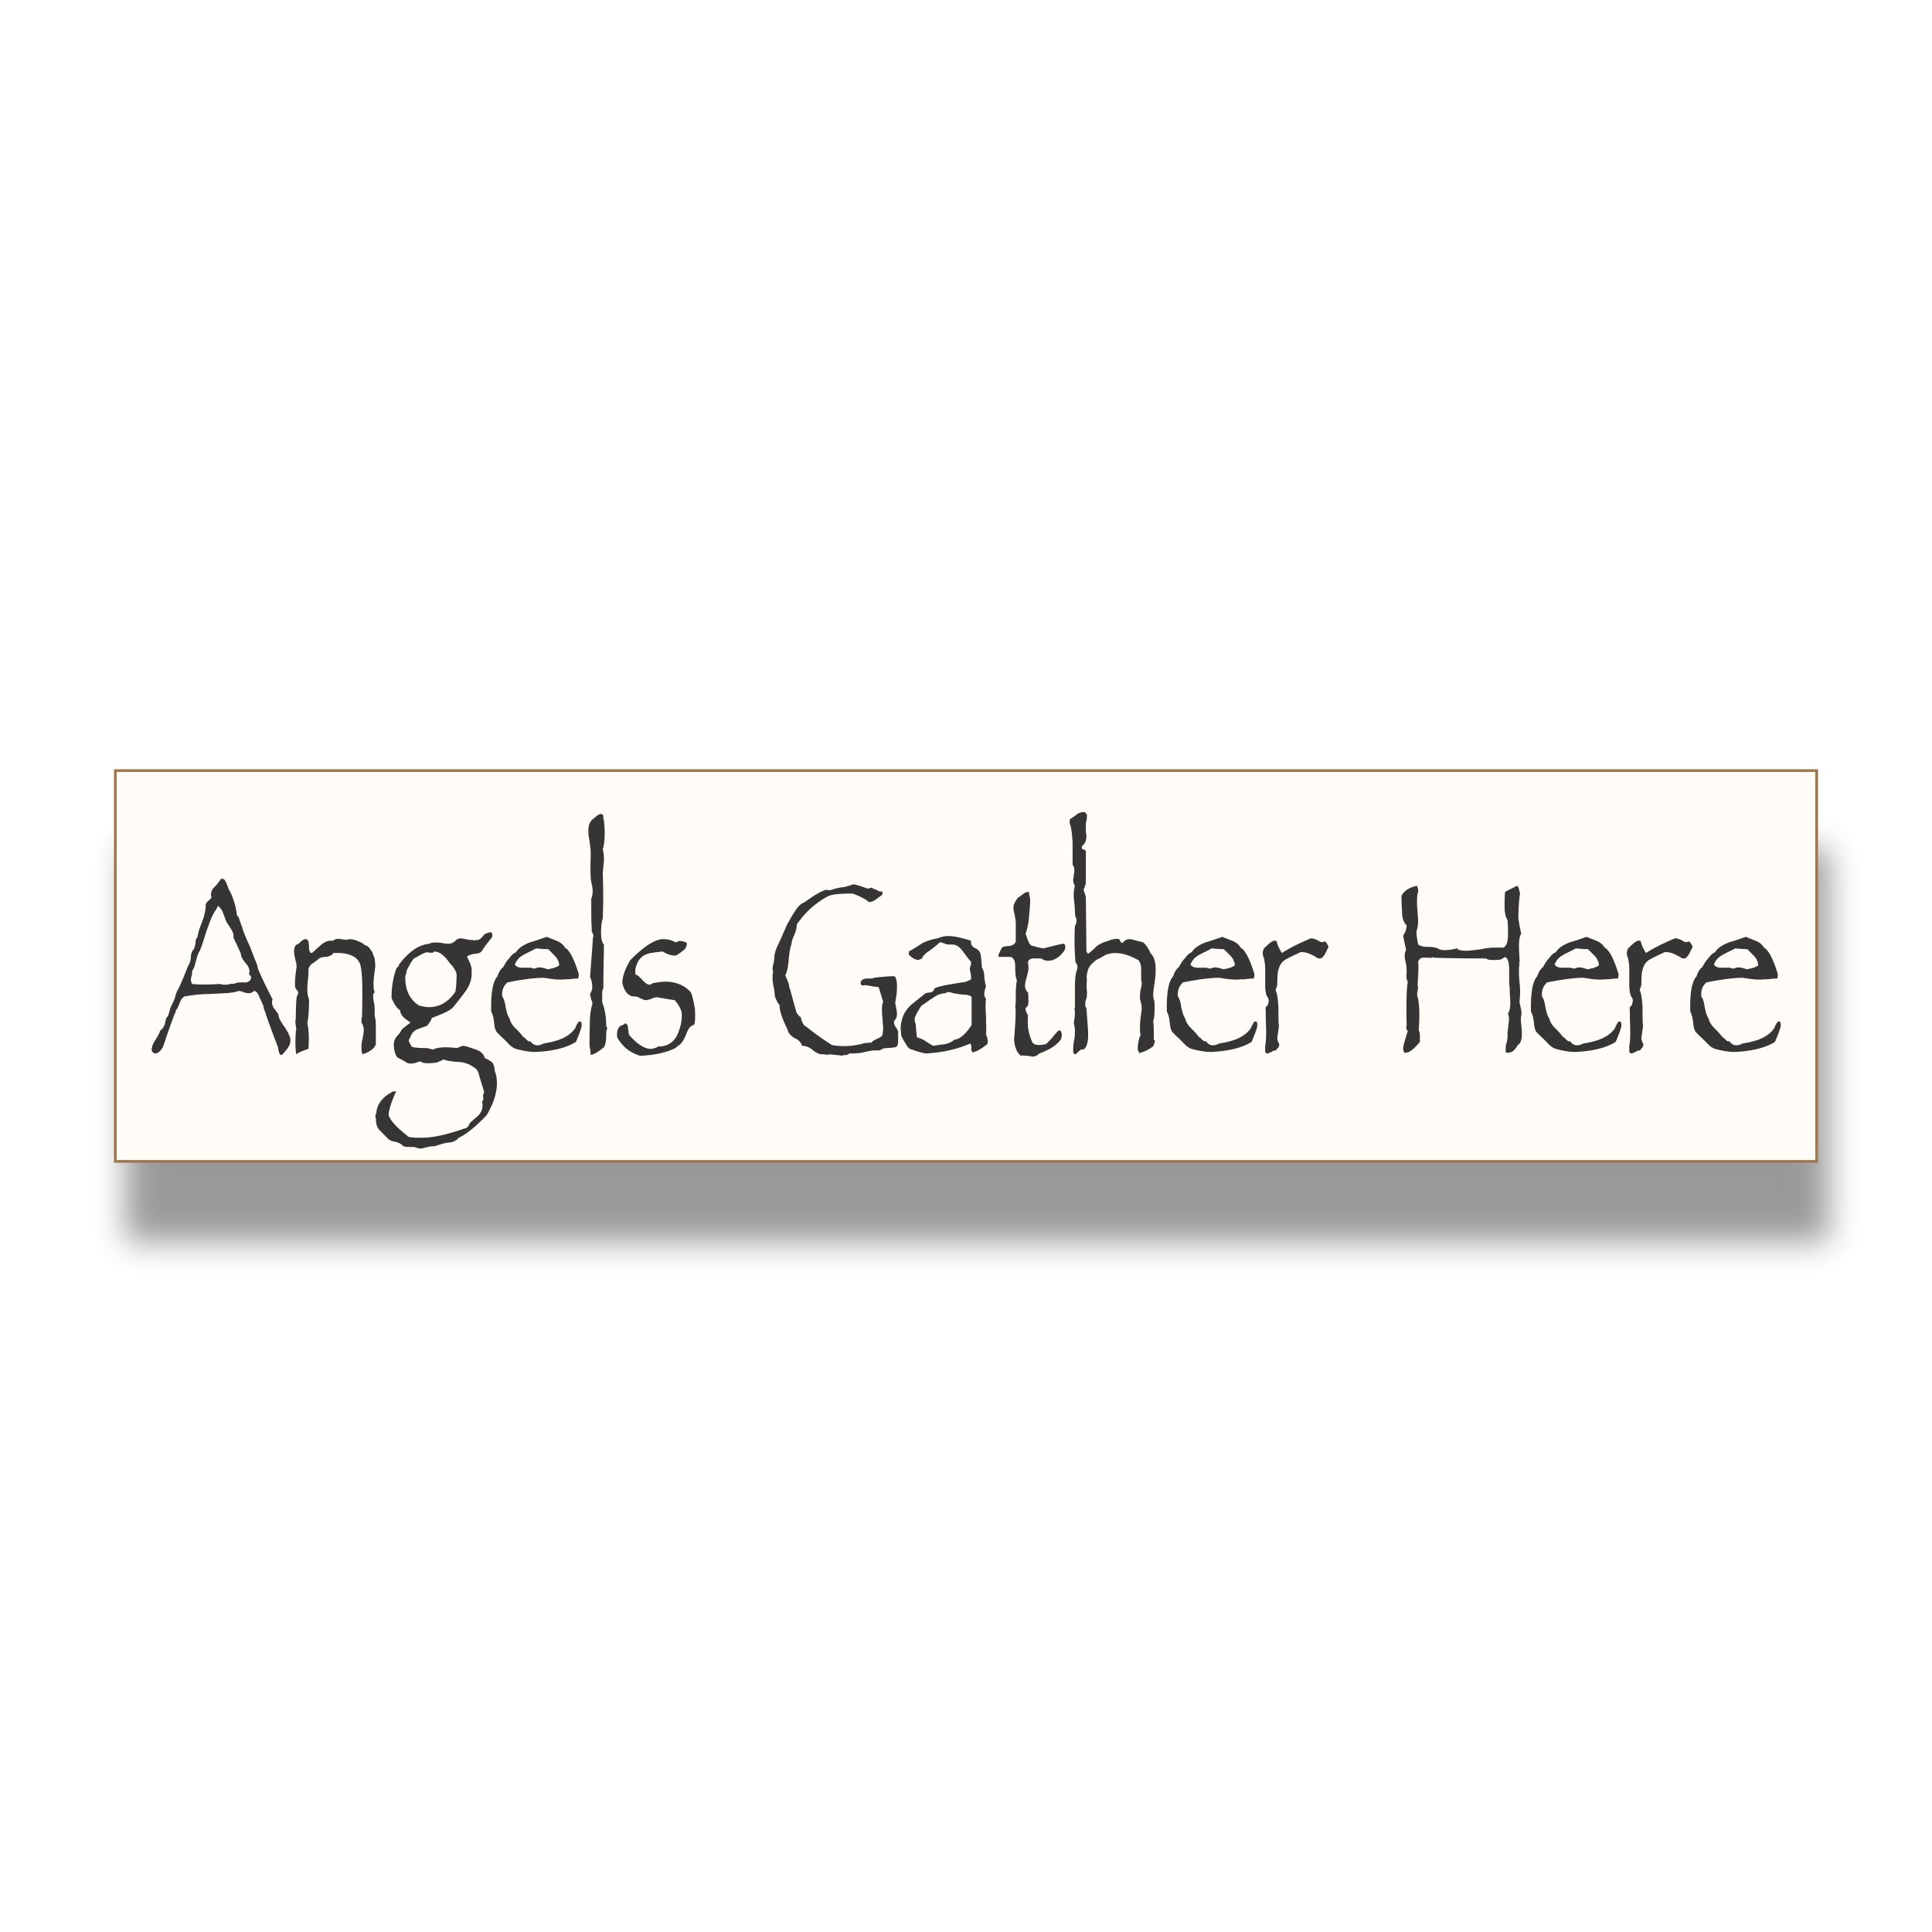 Angels Gather Here Sign